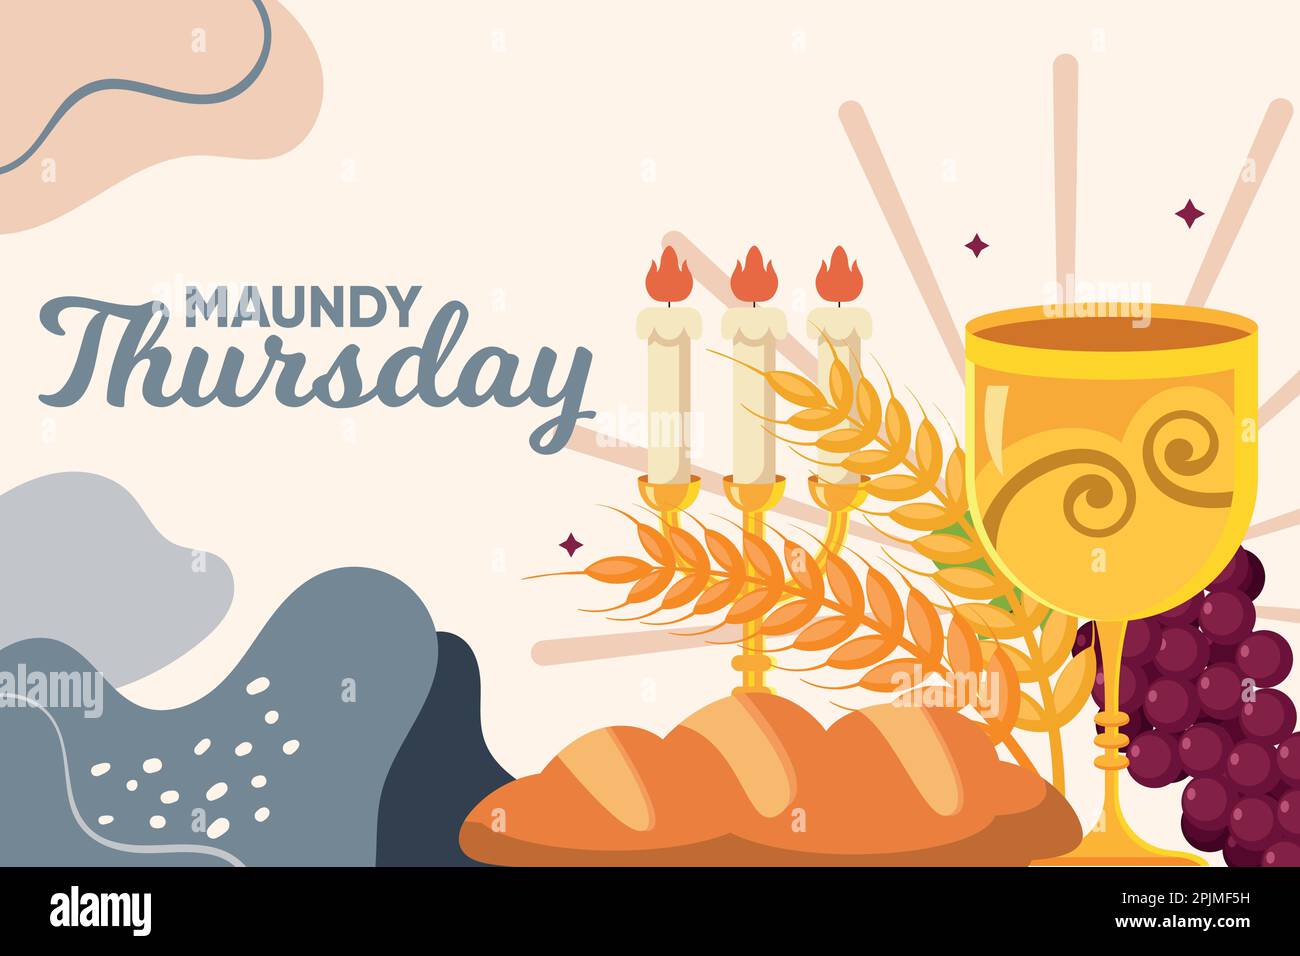 Maundy Thursday with chalice and bread vector illustration Stock Vector